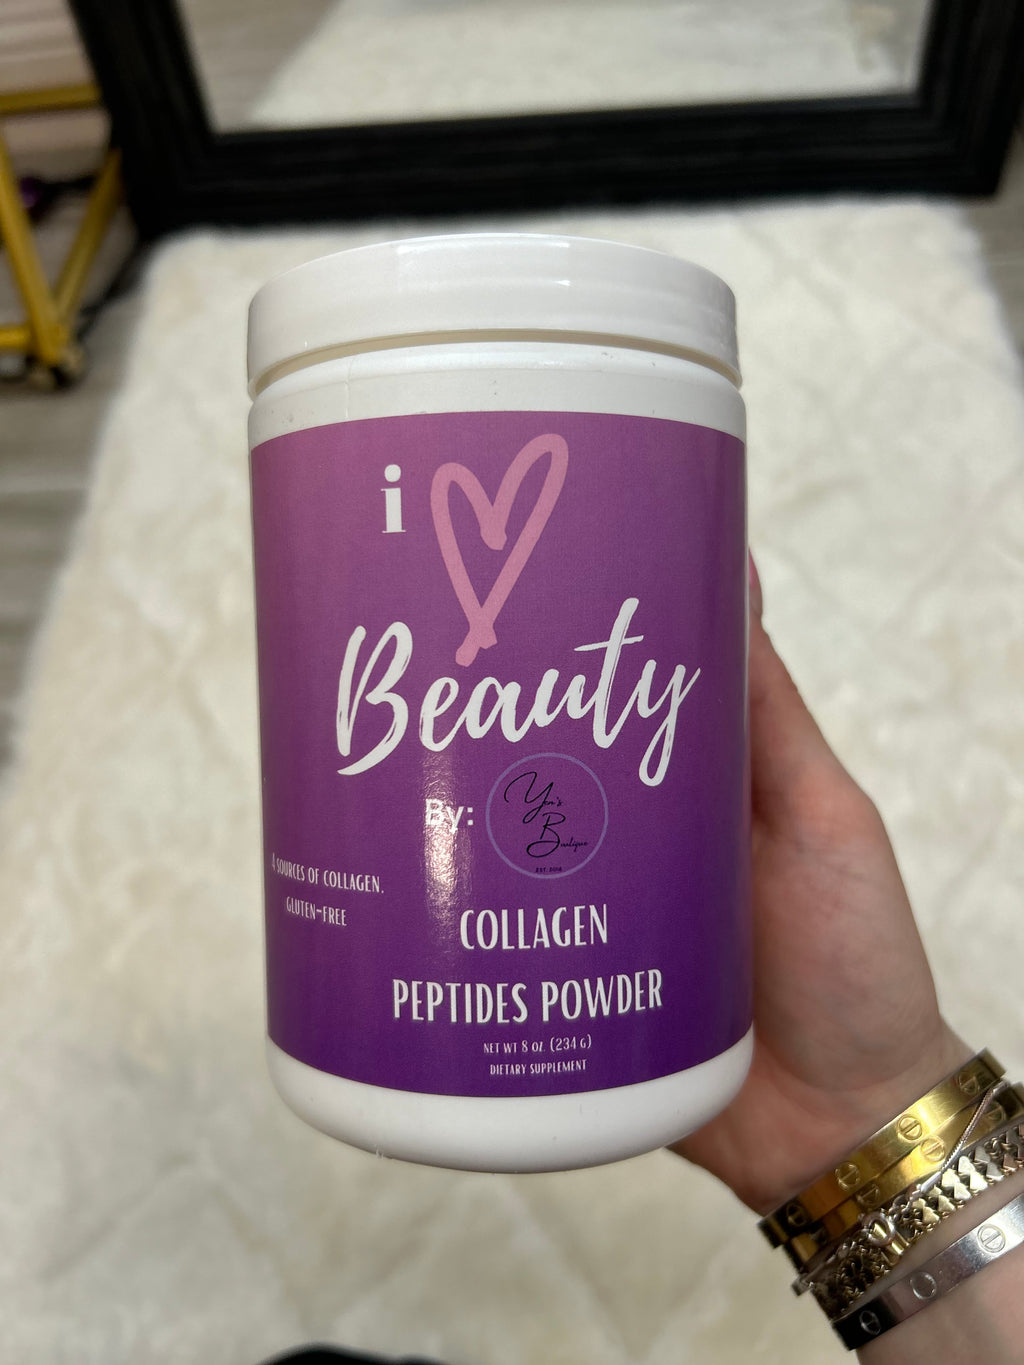 Colageno collagen beauty supplement (ships within 7 days)